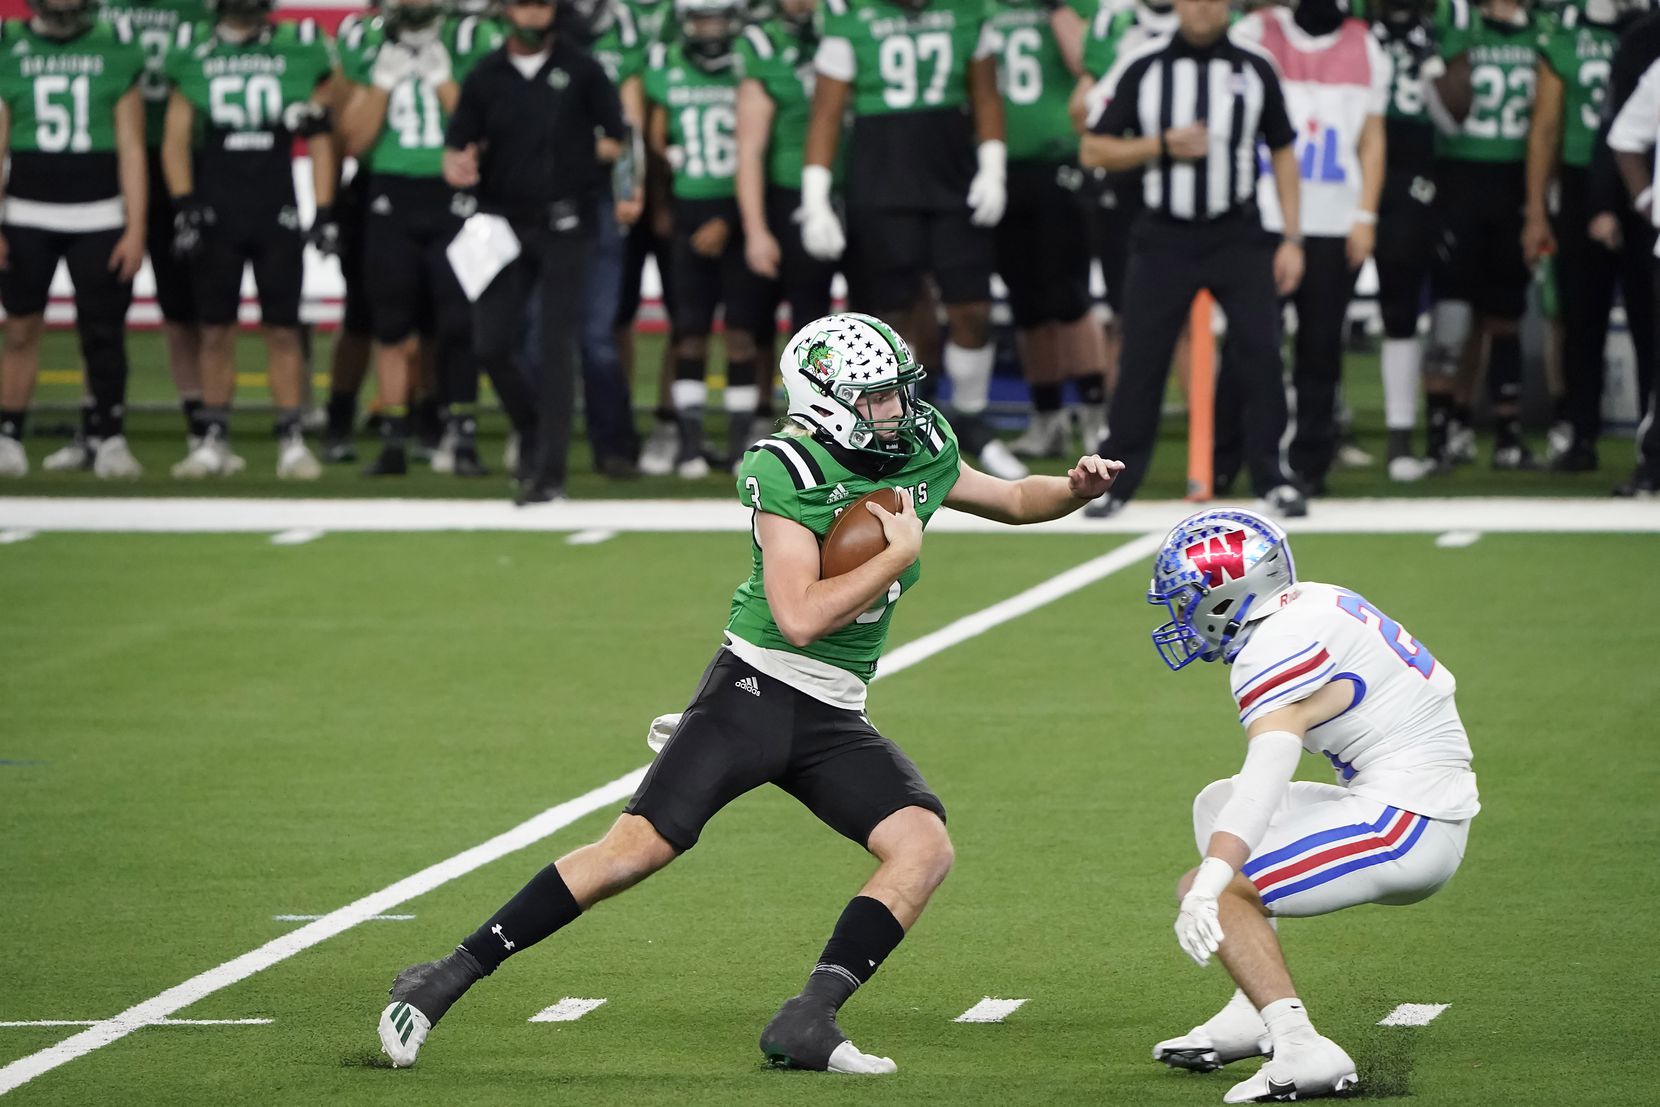 Southlake Carroll quarterback Quinn Ewers (3) tries to get past Austin Westlake defensive back Patrick Churchill (24) during the second quarter of the Class 6A Division I state football championship game at AT&T Stadium on Saturday, Jan. 16, 2021, in Arlington, Texas.